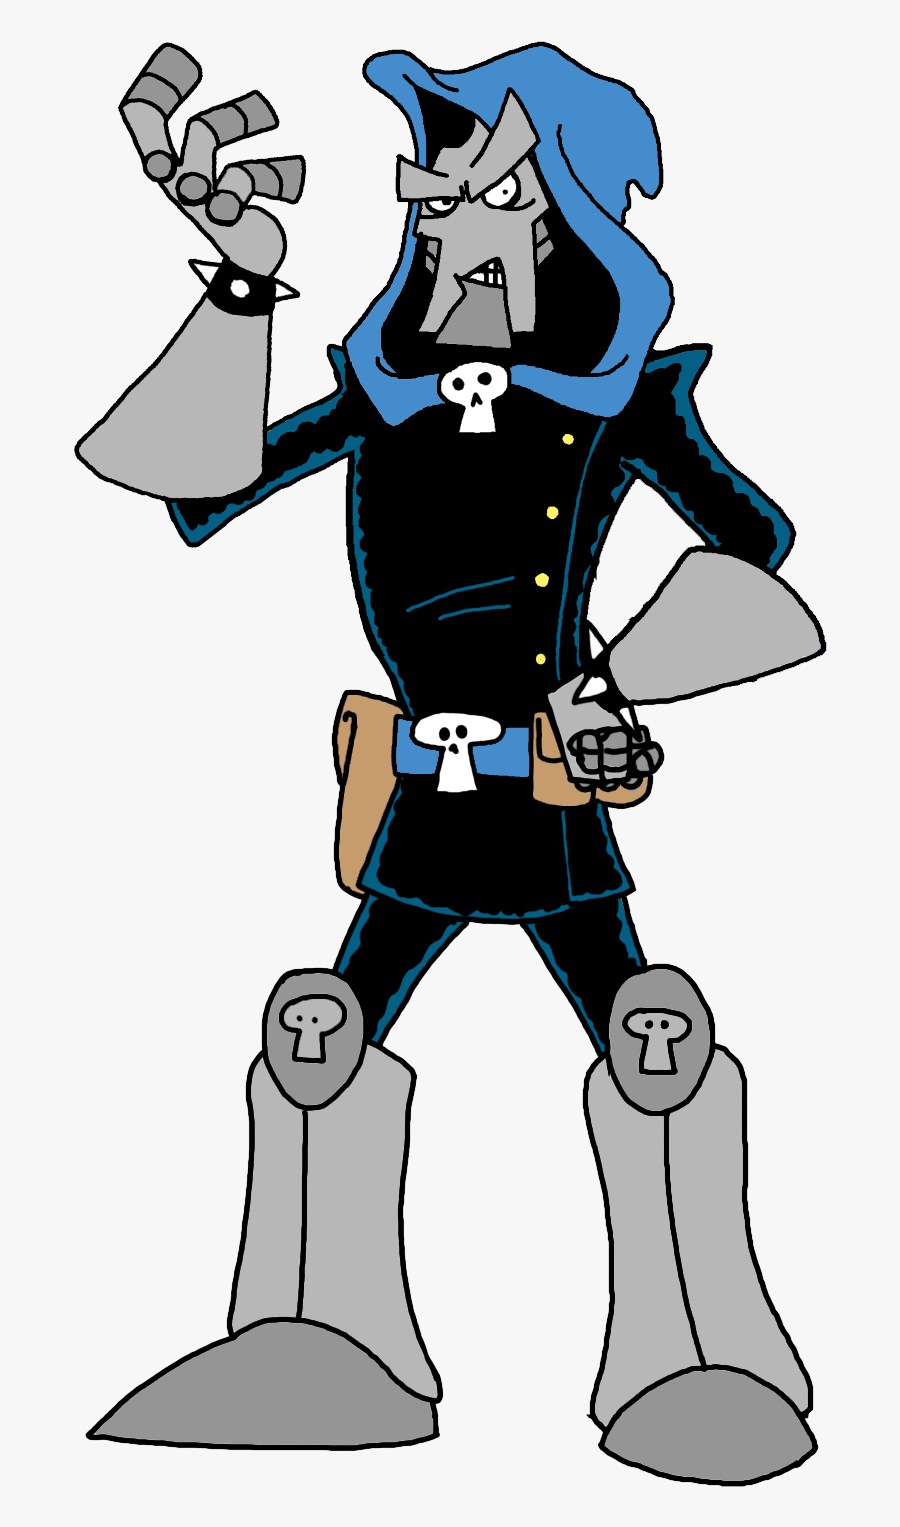 Bad Guy Pictures - Cartoon Bad Guy Png, Transparent Clipart